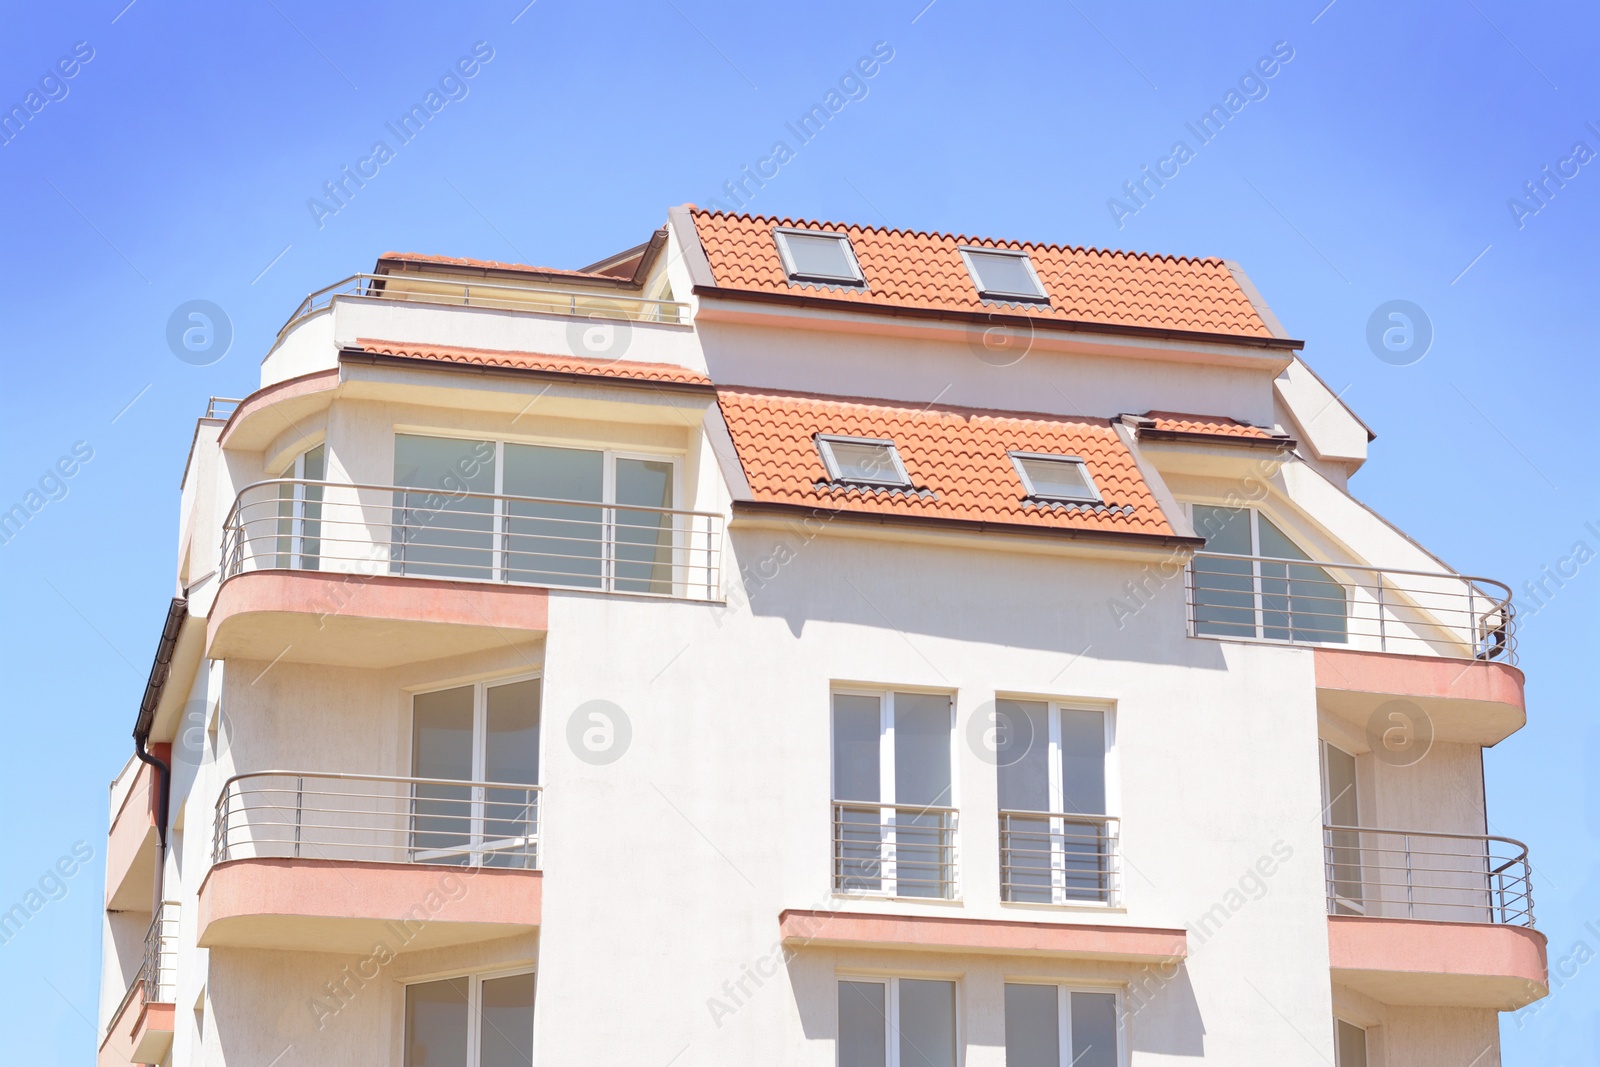 Photo of Exterior of beautiful residential building against blue sky